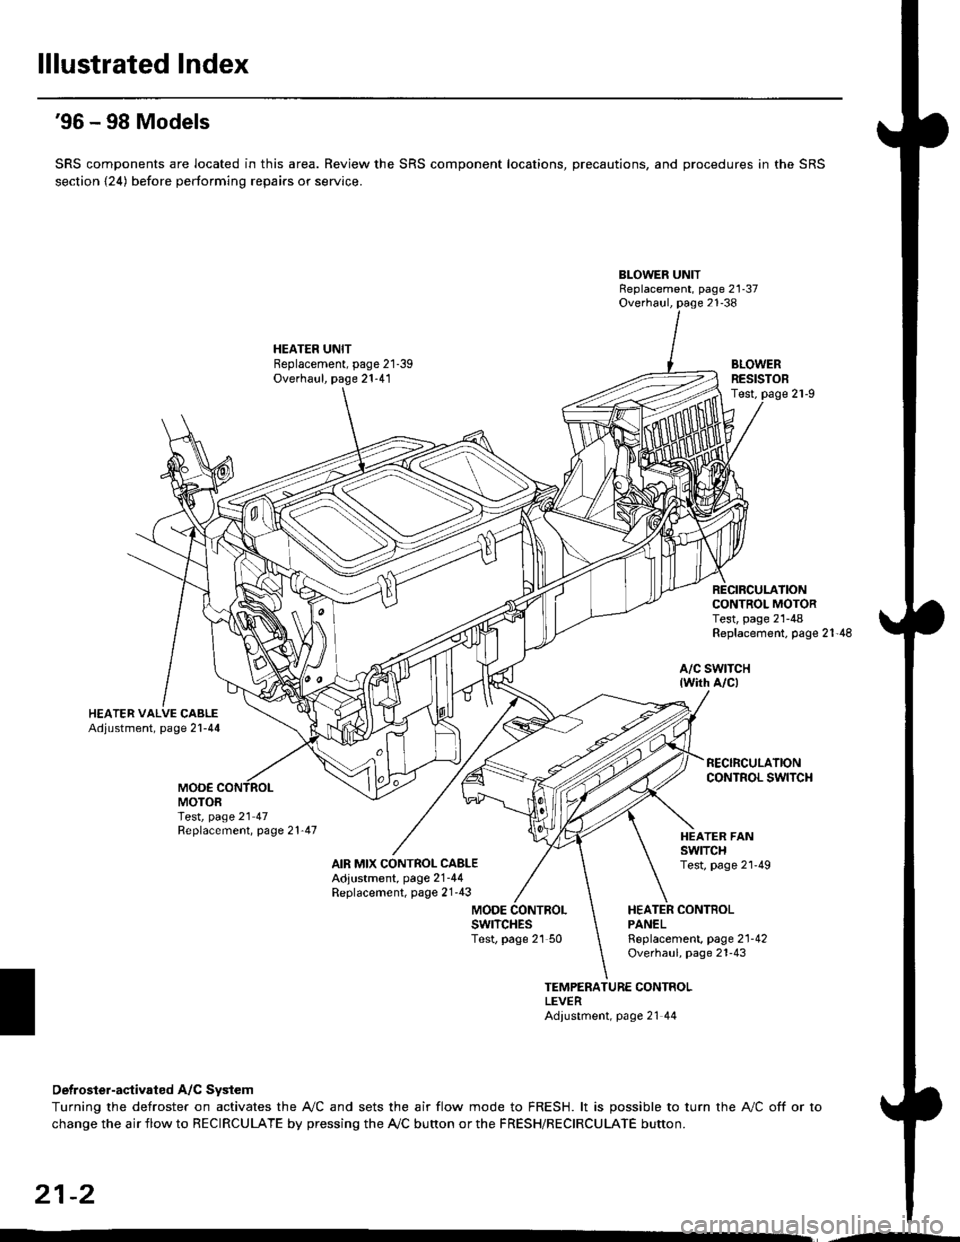 HONDA CIVIC 1997 6.G Workshop Manual lllustrated Index
96 - 98 Models
SRS components are located in this area. Review the SRS component locations, precautions, and procedures in the SRS
section {24) before performing repairs or service.